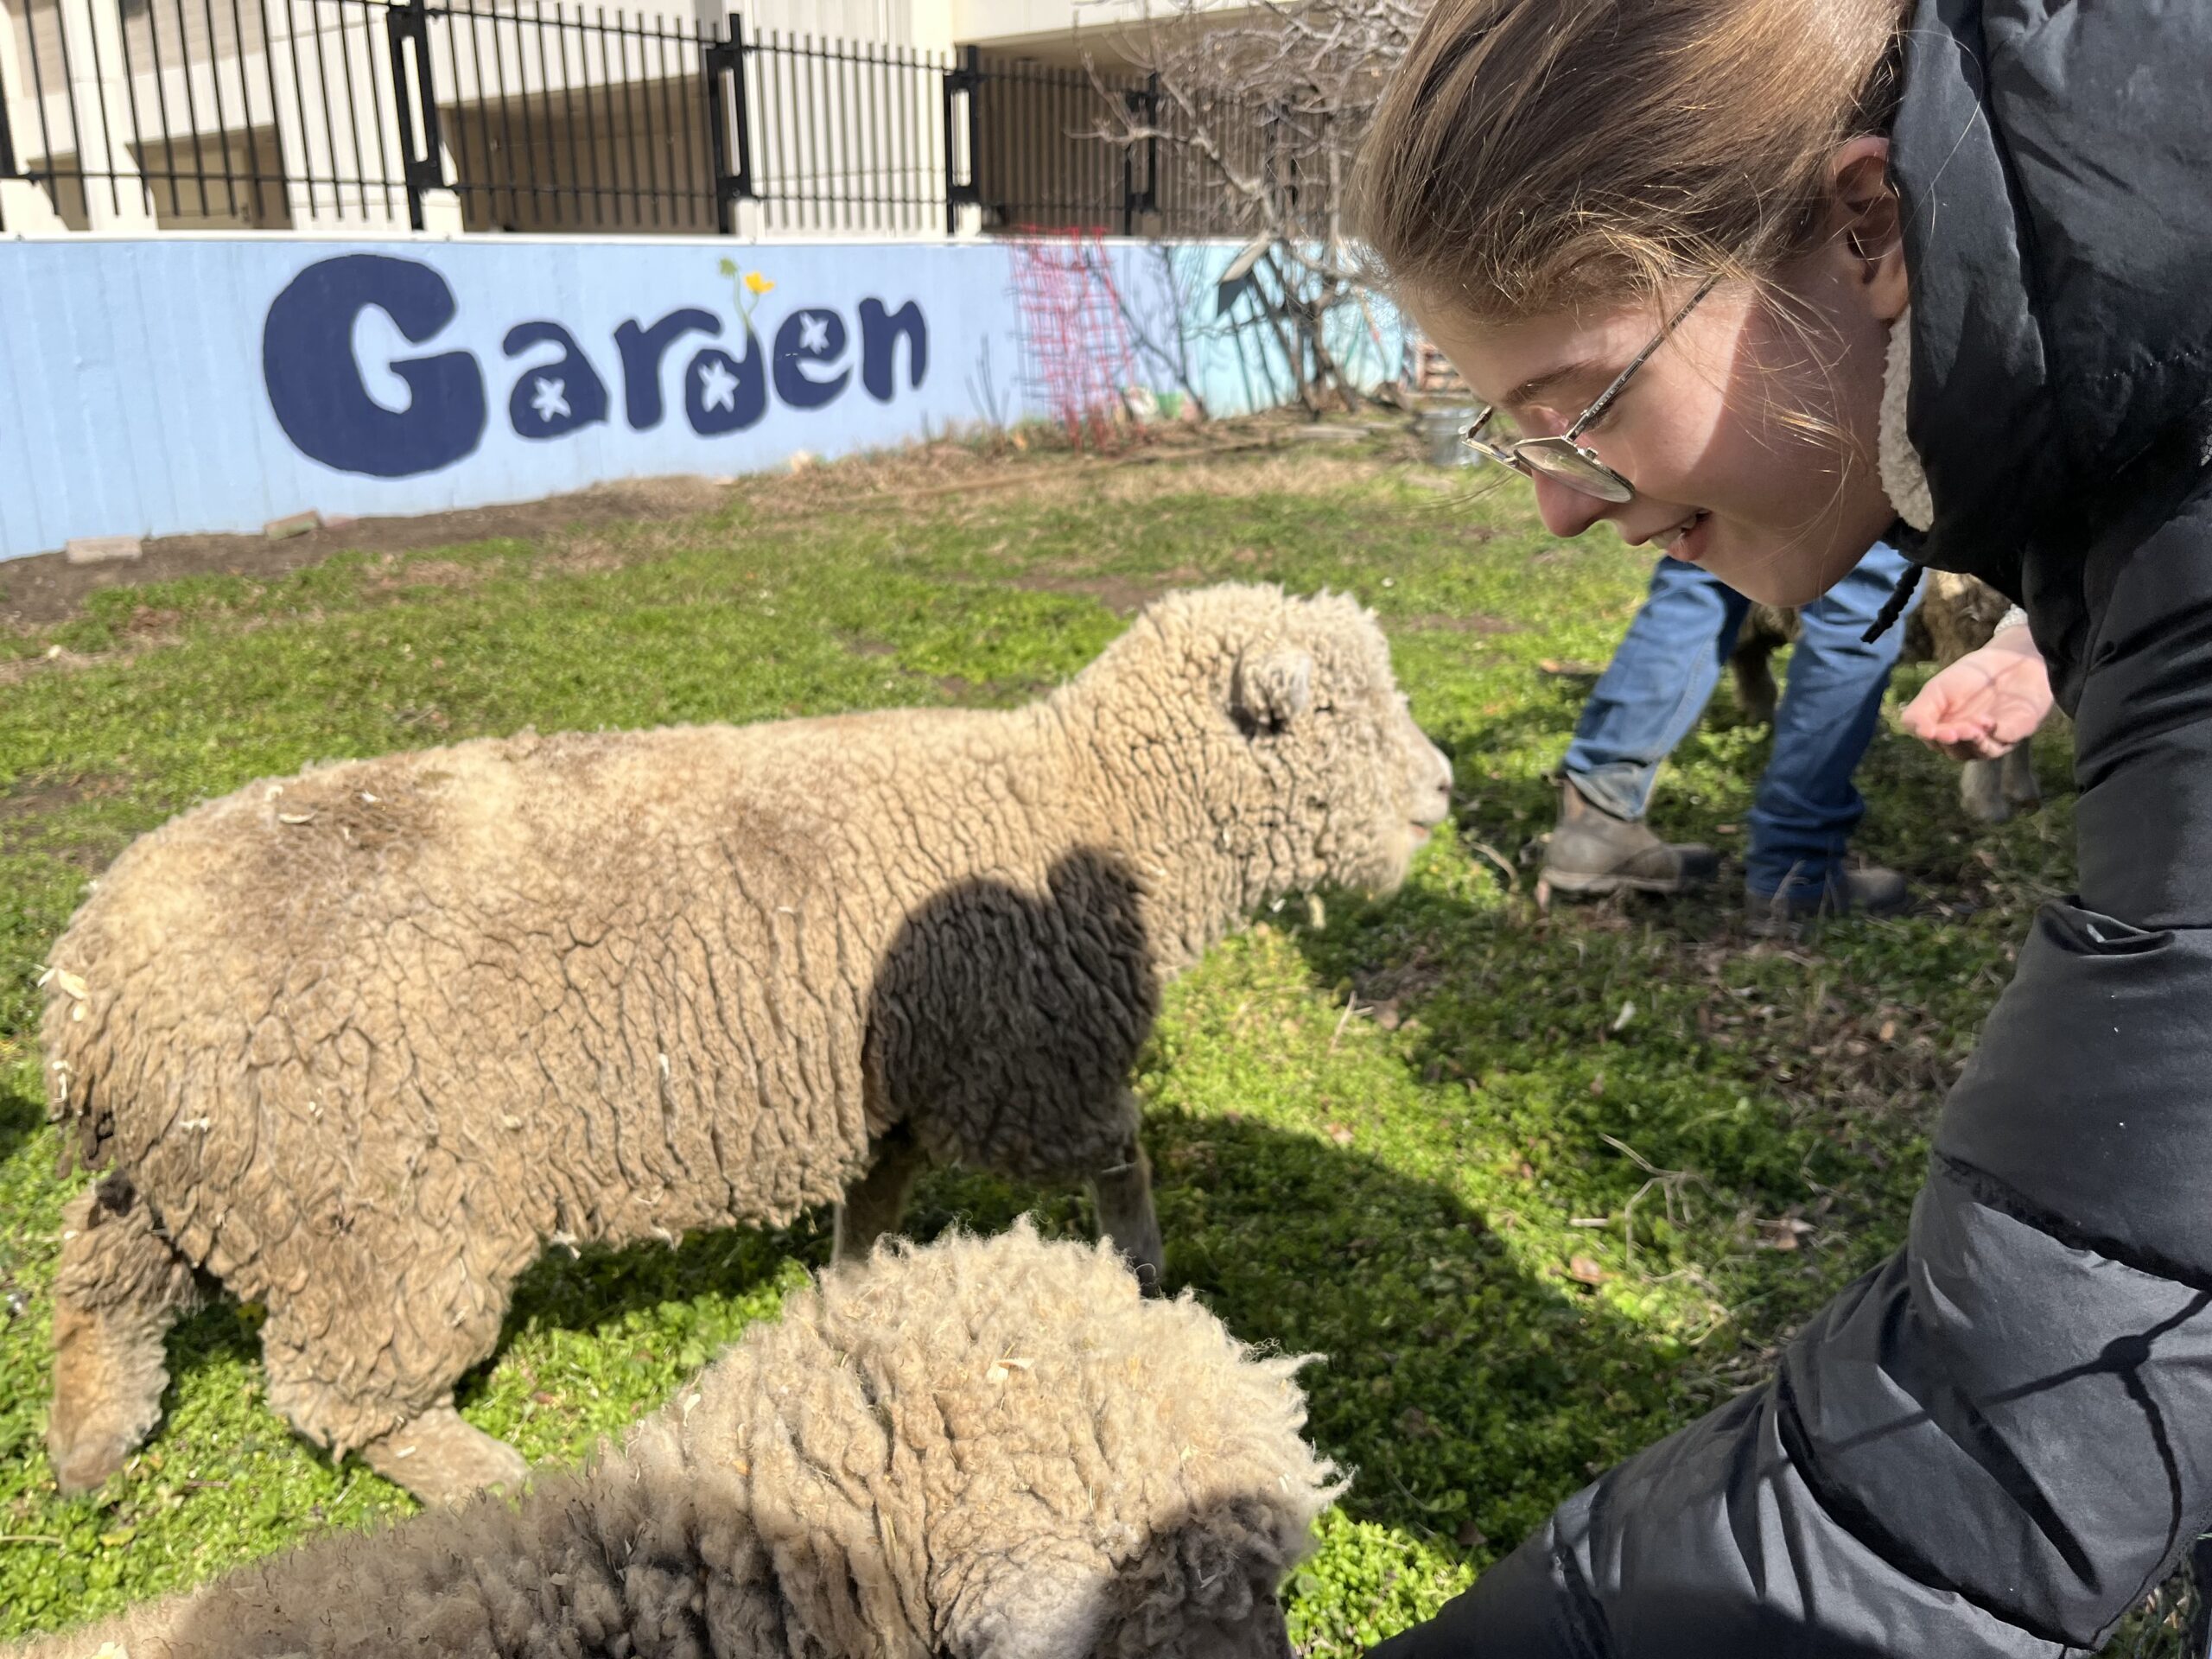 G-double-Ewe: Regenerative agriculture on an urban campus